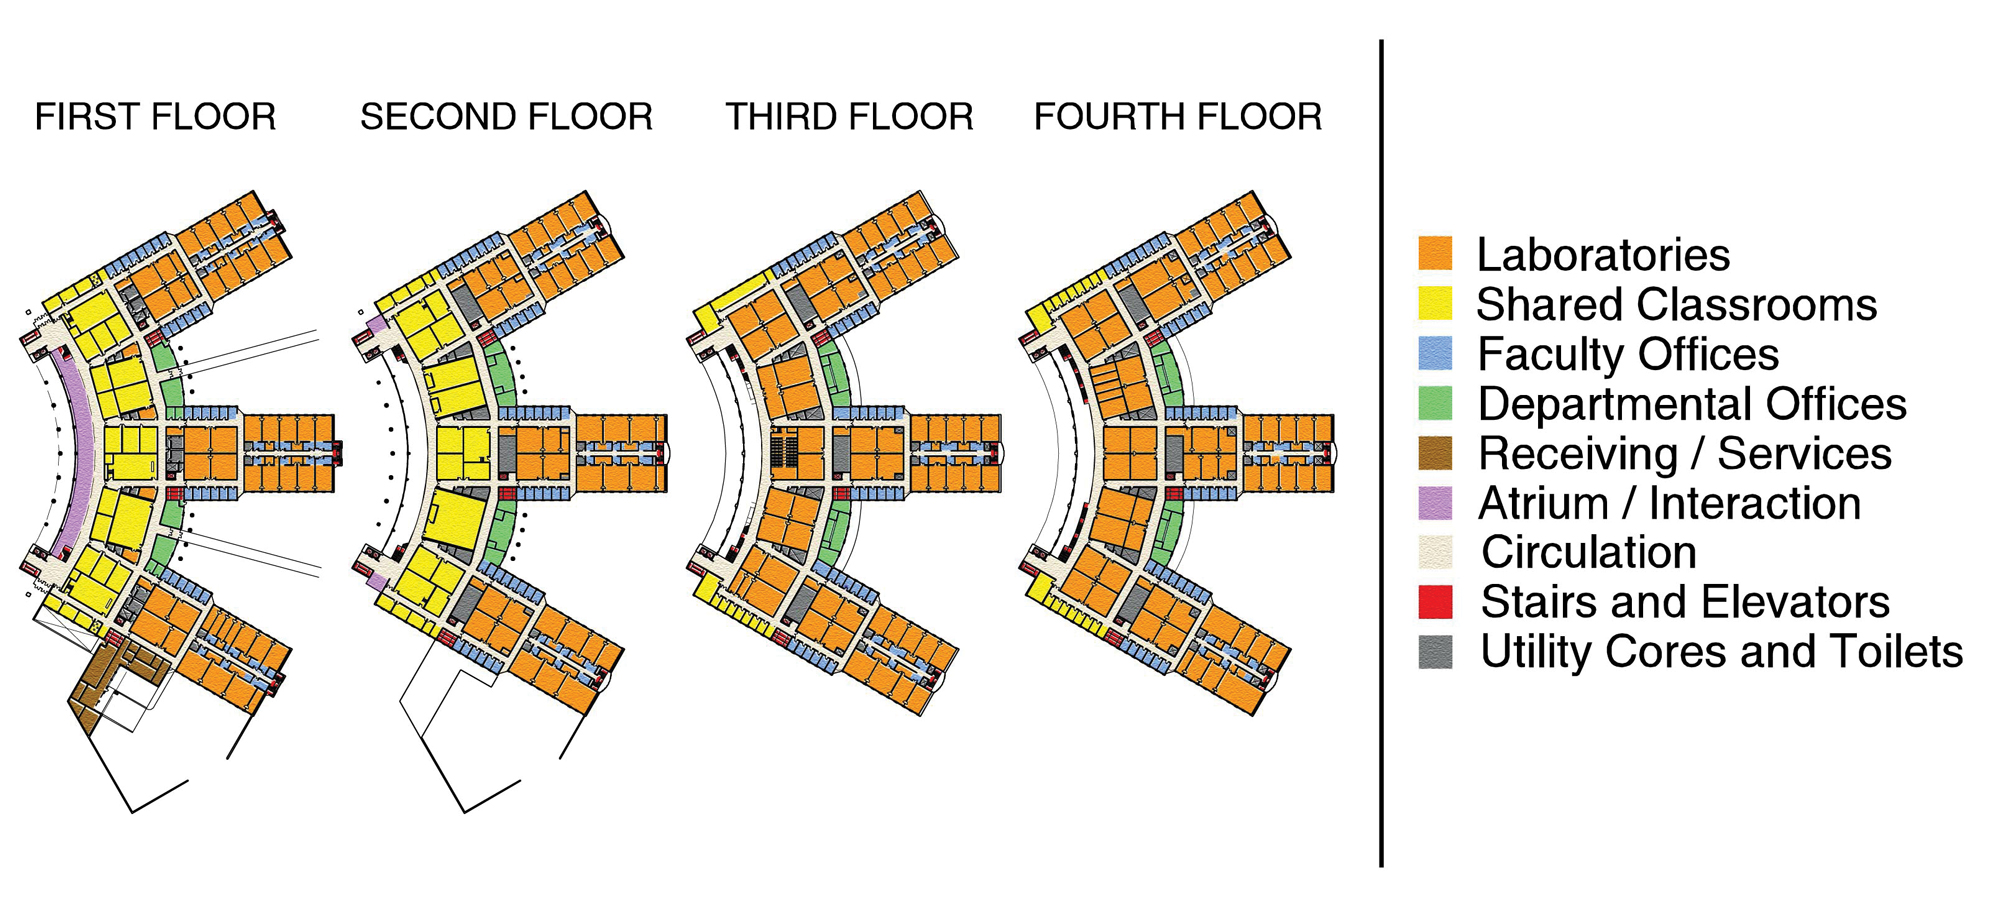 Layout of the Four Floors in the Baylor Sciences Building